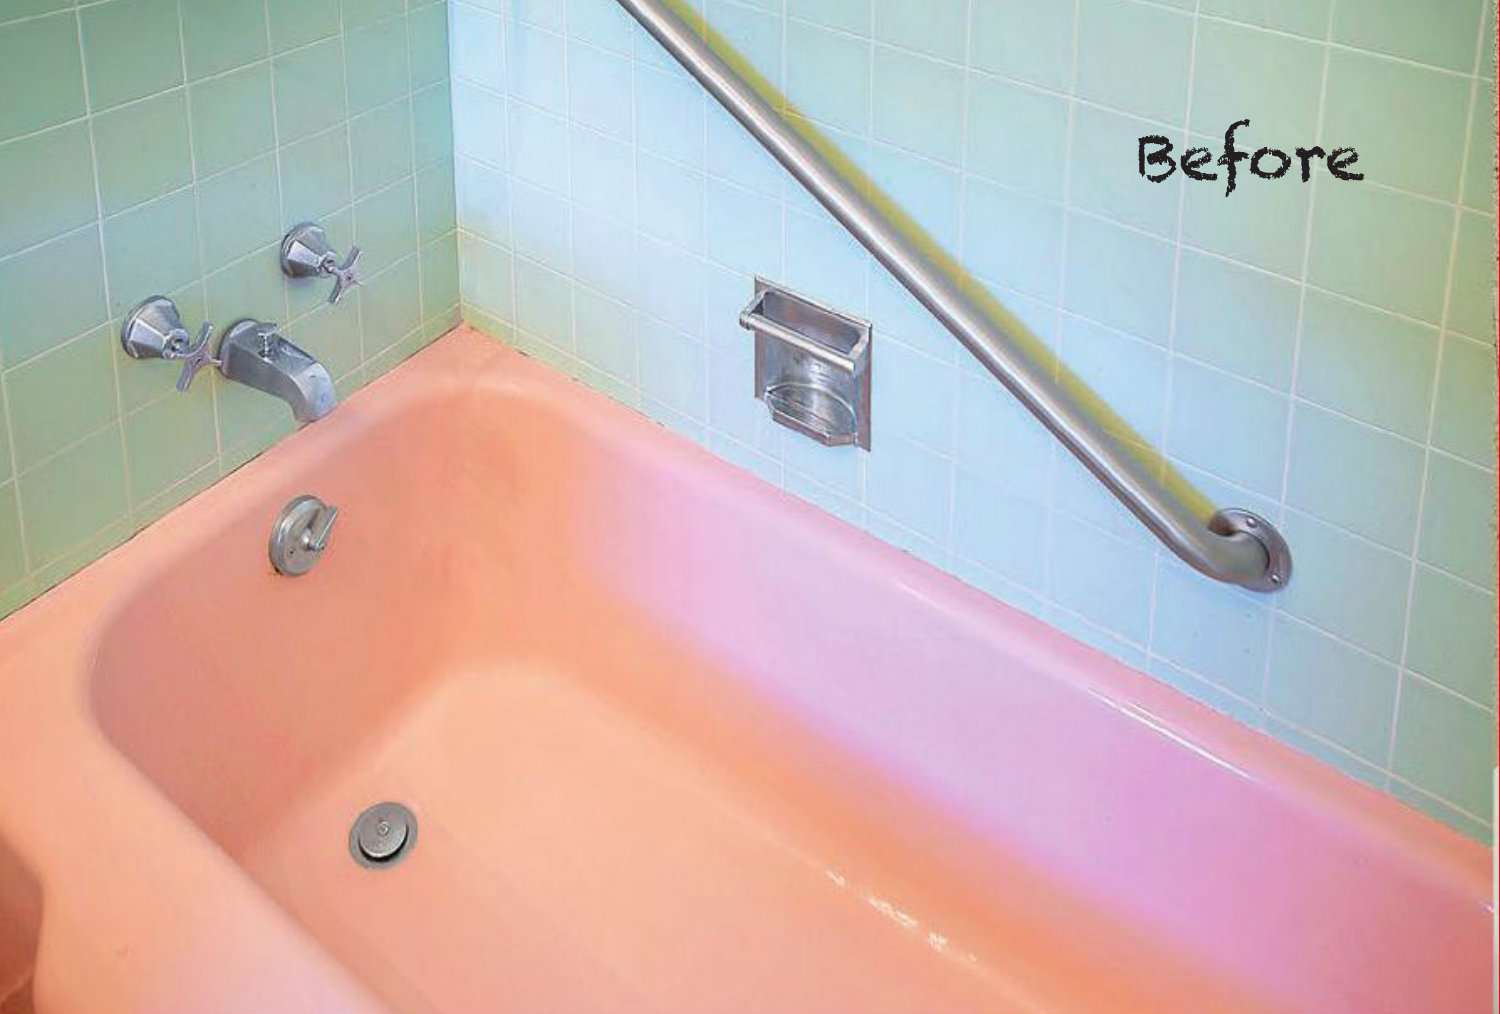 A Better Alternative To Bathtub Liners, Are Bathtub Liners Any Good